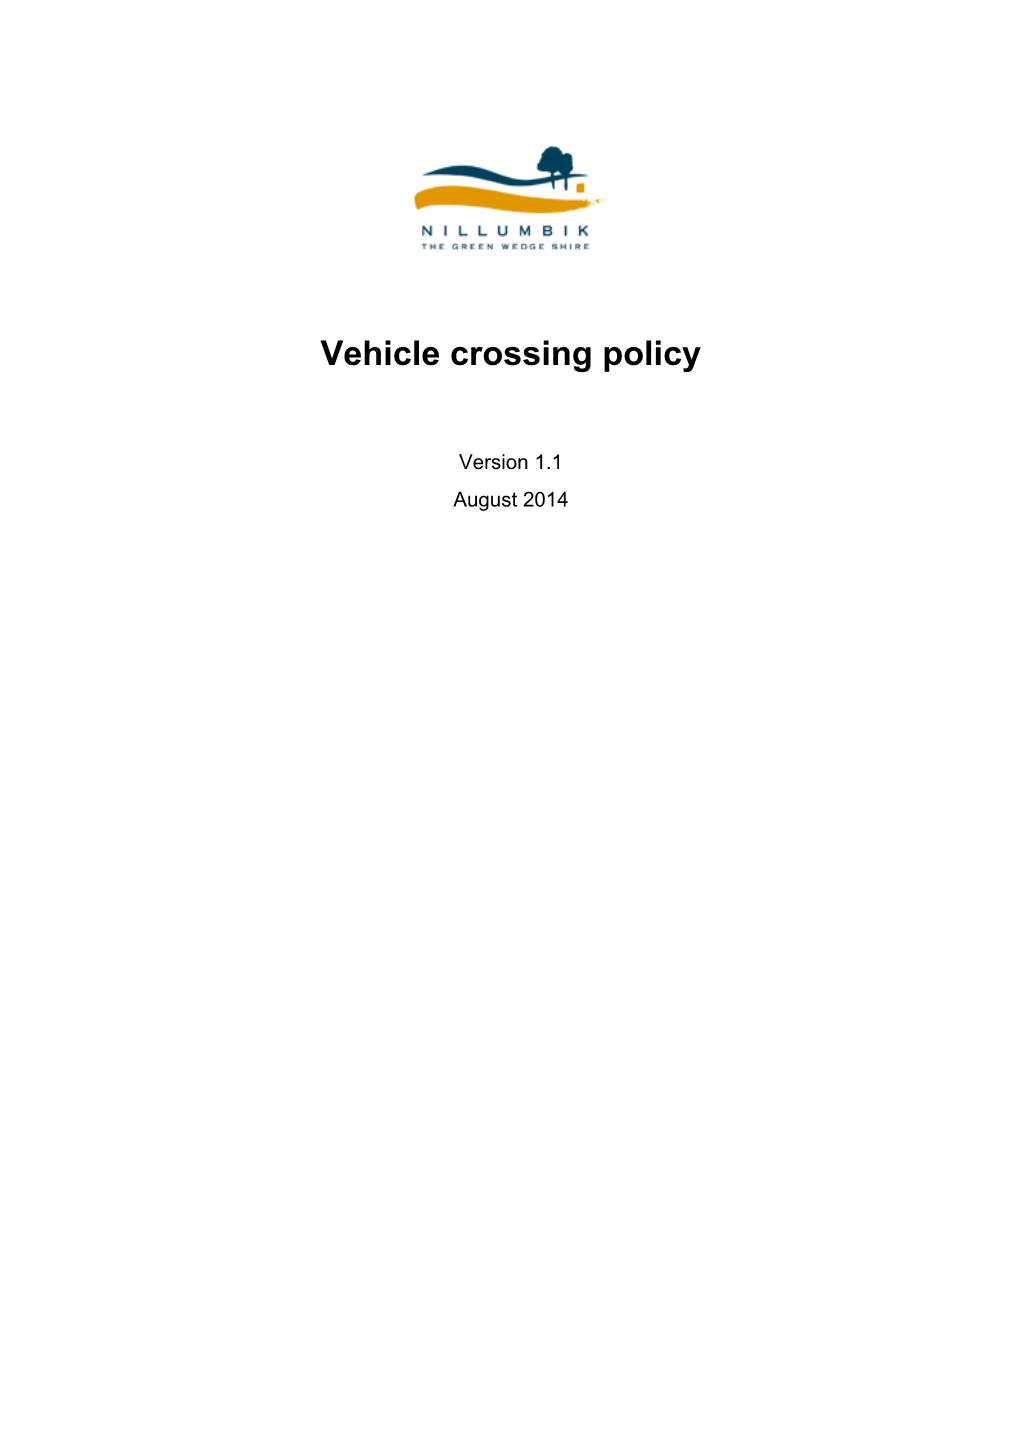 Vehicle Crossing Policy